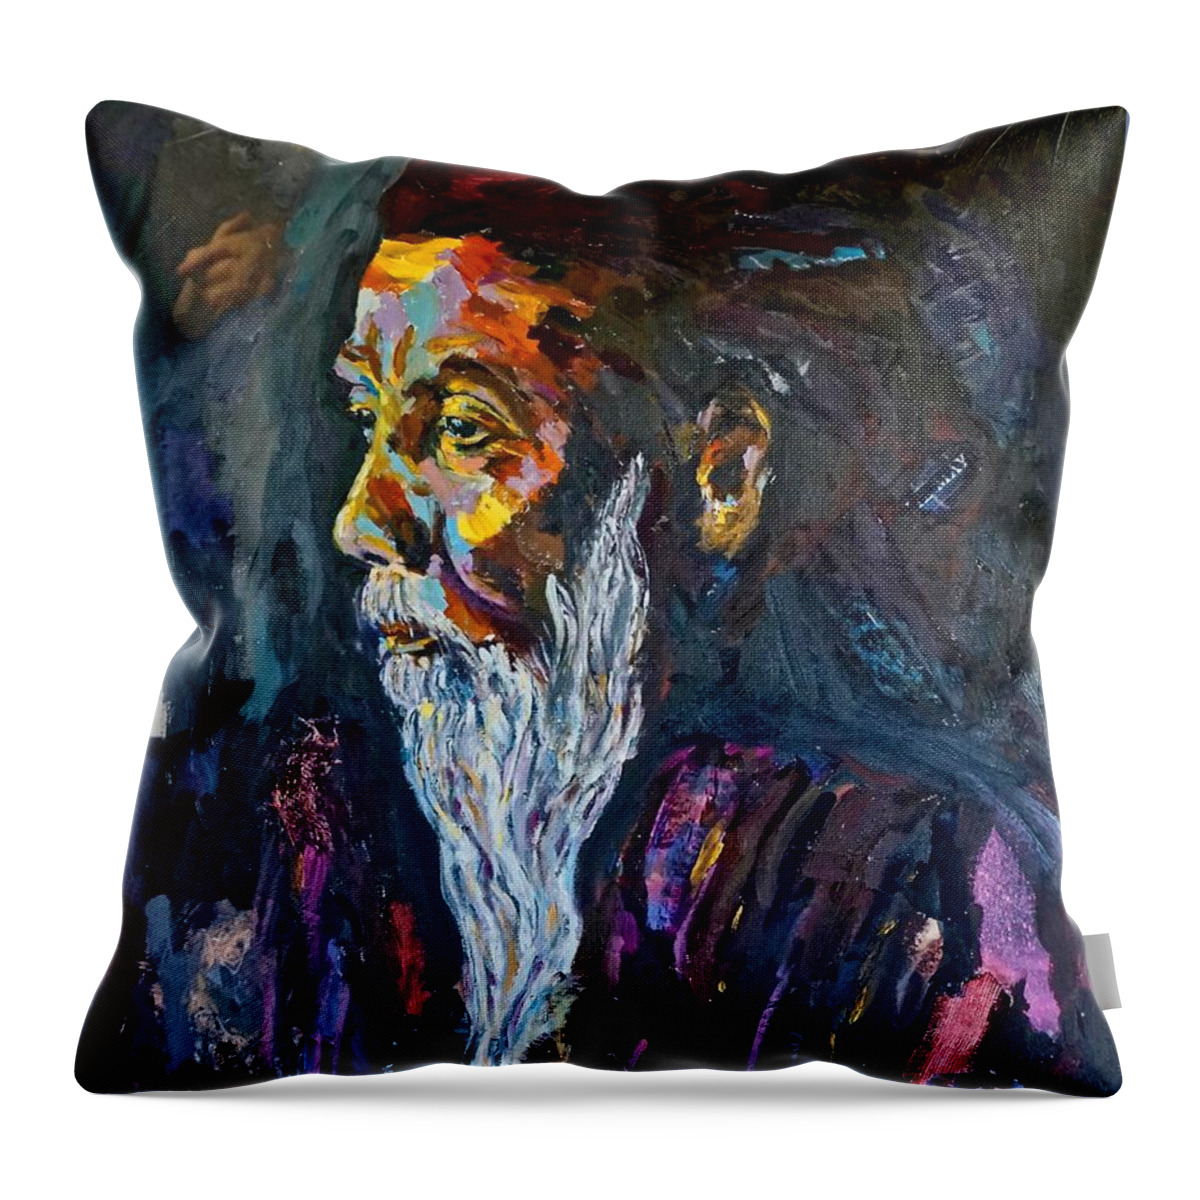 Mixed Media Throw Pillow featuring the mixed media Hermit at Golden Rock, Burma by Michael Cinnamond